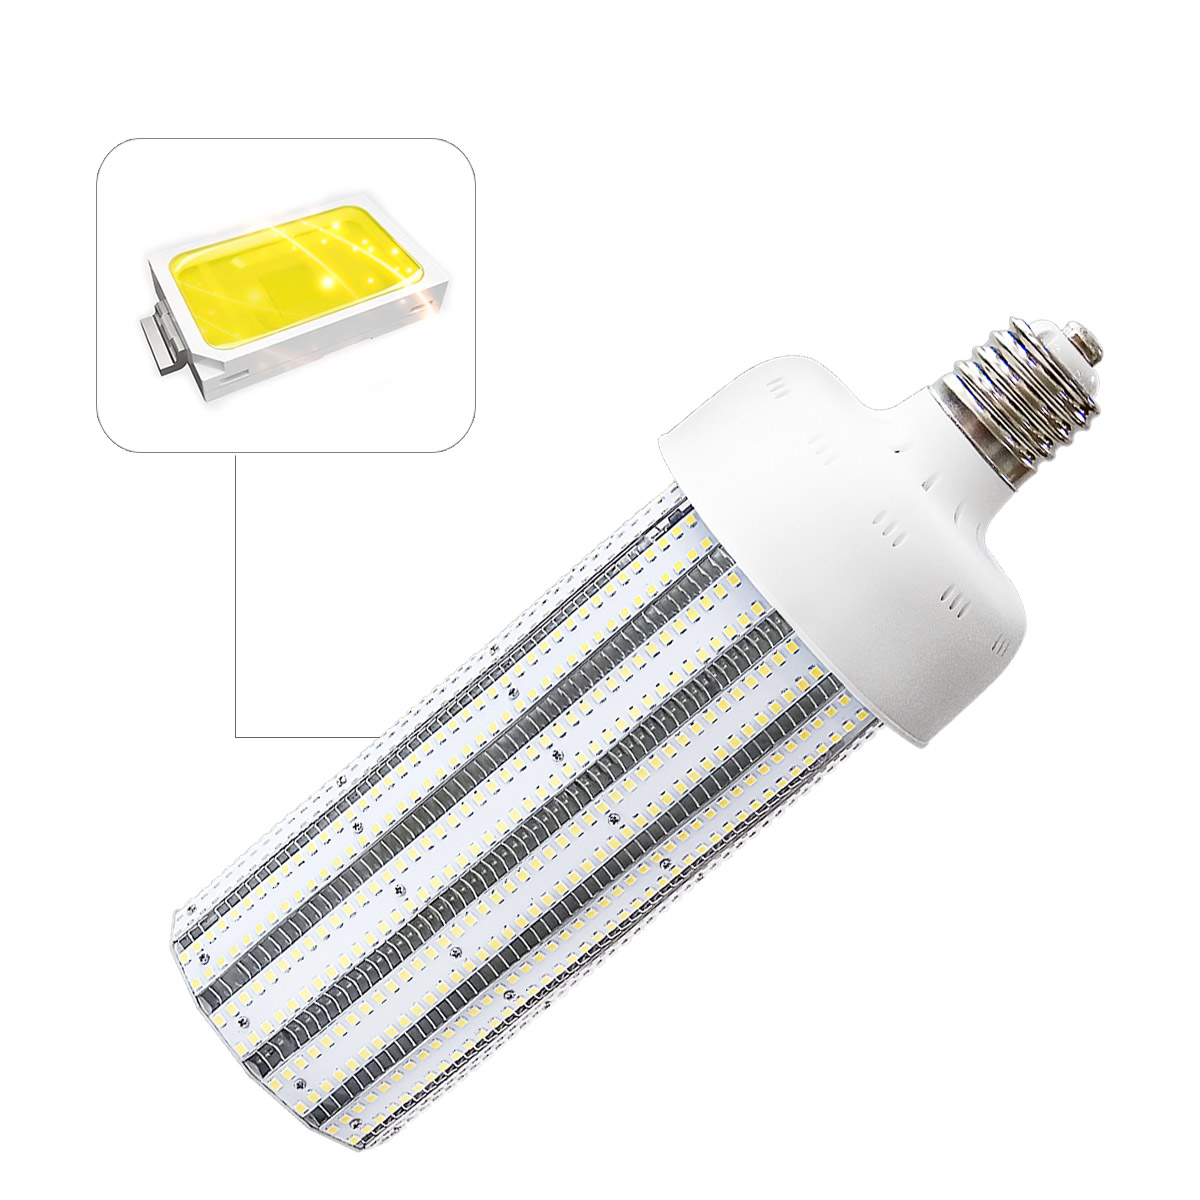 KAWELL 100W LED Corn Light Bulb, E39 Large Mogul Base LED Street/Area Light, Replacement for Fixtures HID/HPS/Metal Halide or CFL, 12000 lumen 3200K (Warm White) UL Listed TUV-Qualified DLC Certified